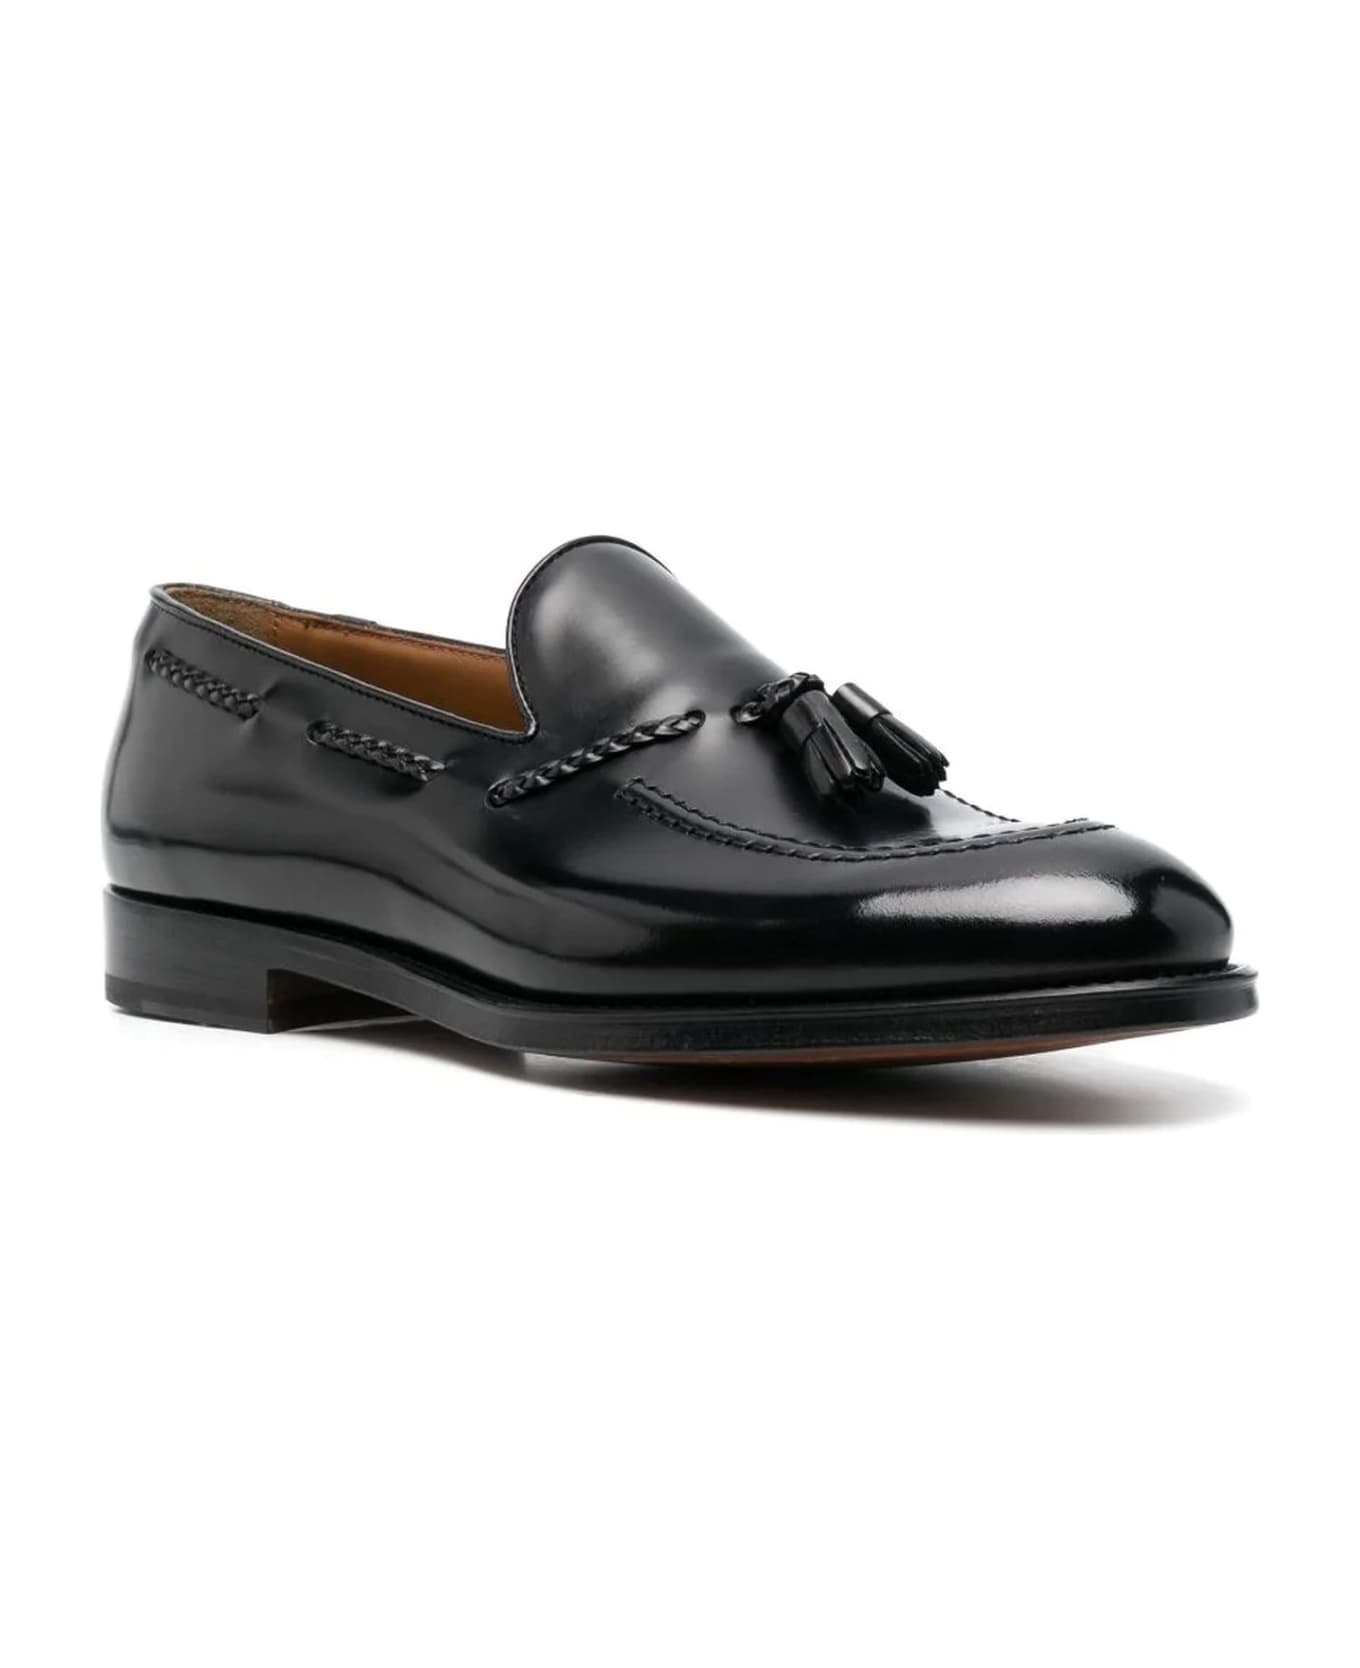 Doucal's Black Calf Leather Loafers - Black